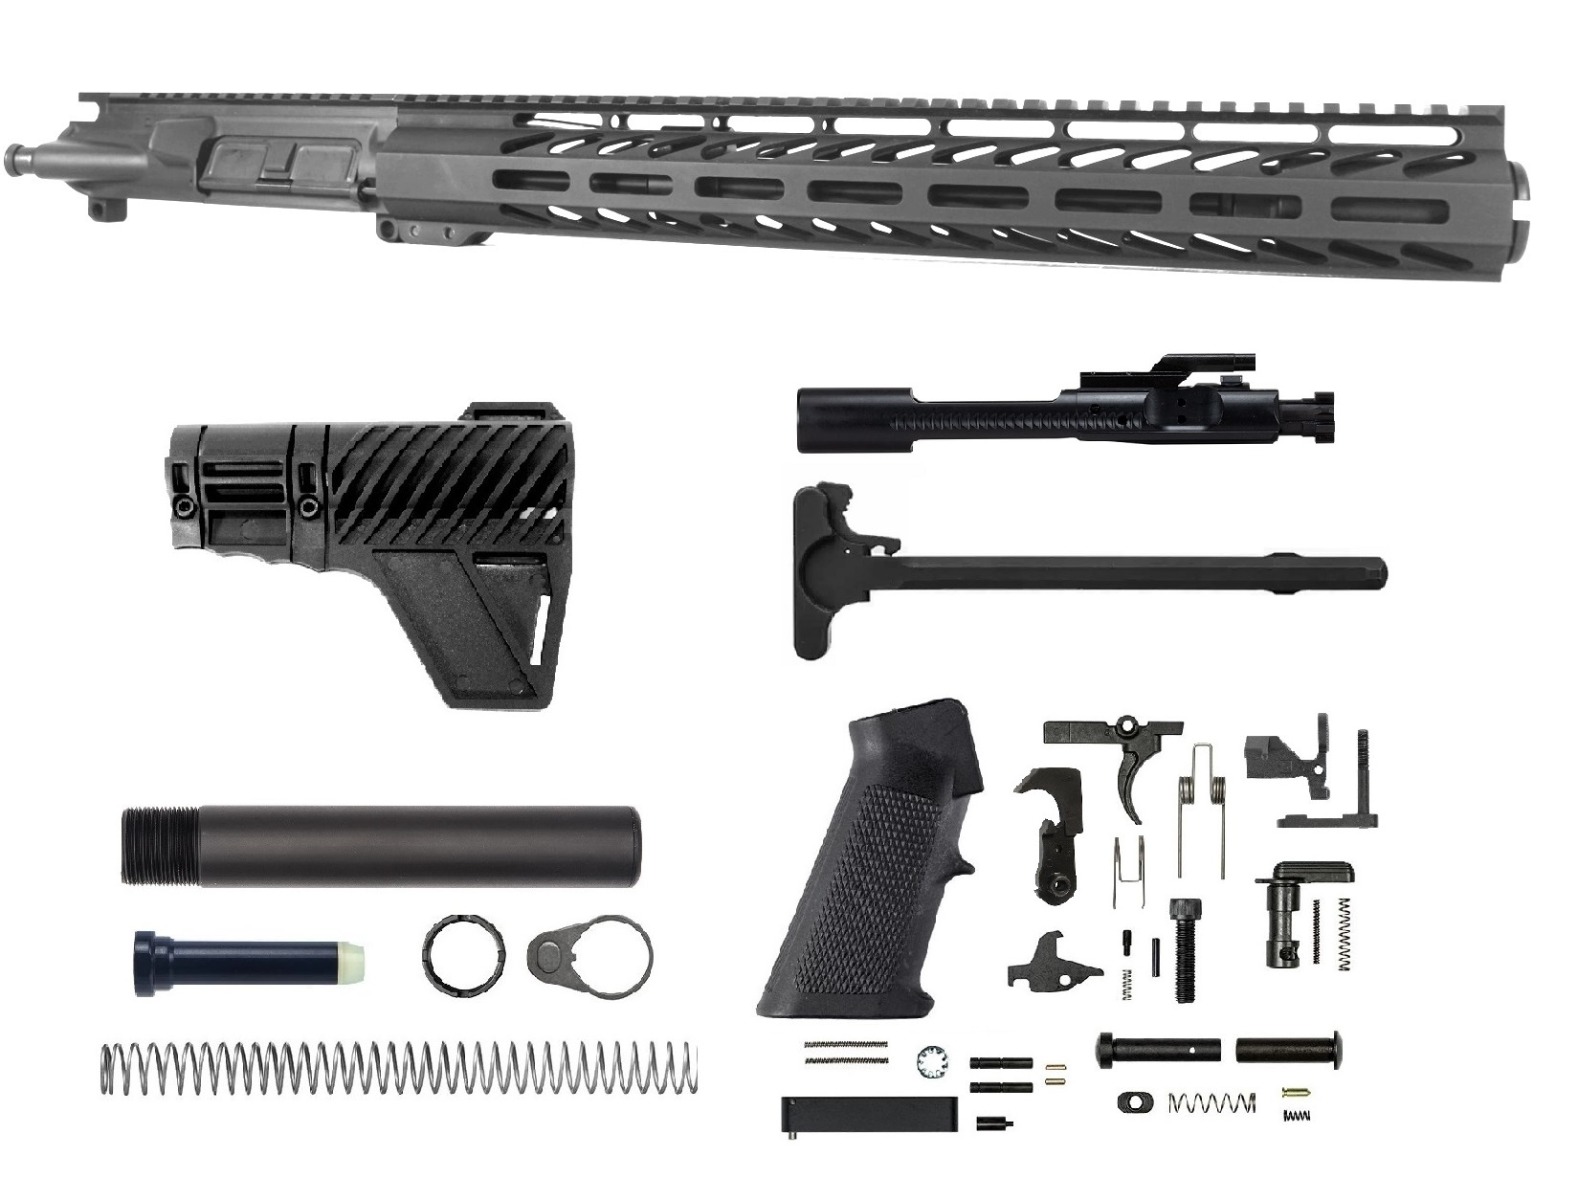 12.5 inch 300 Blackout AR-15 Upper Kit | Pro2A Tactical